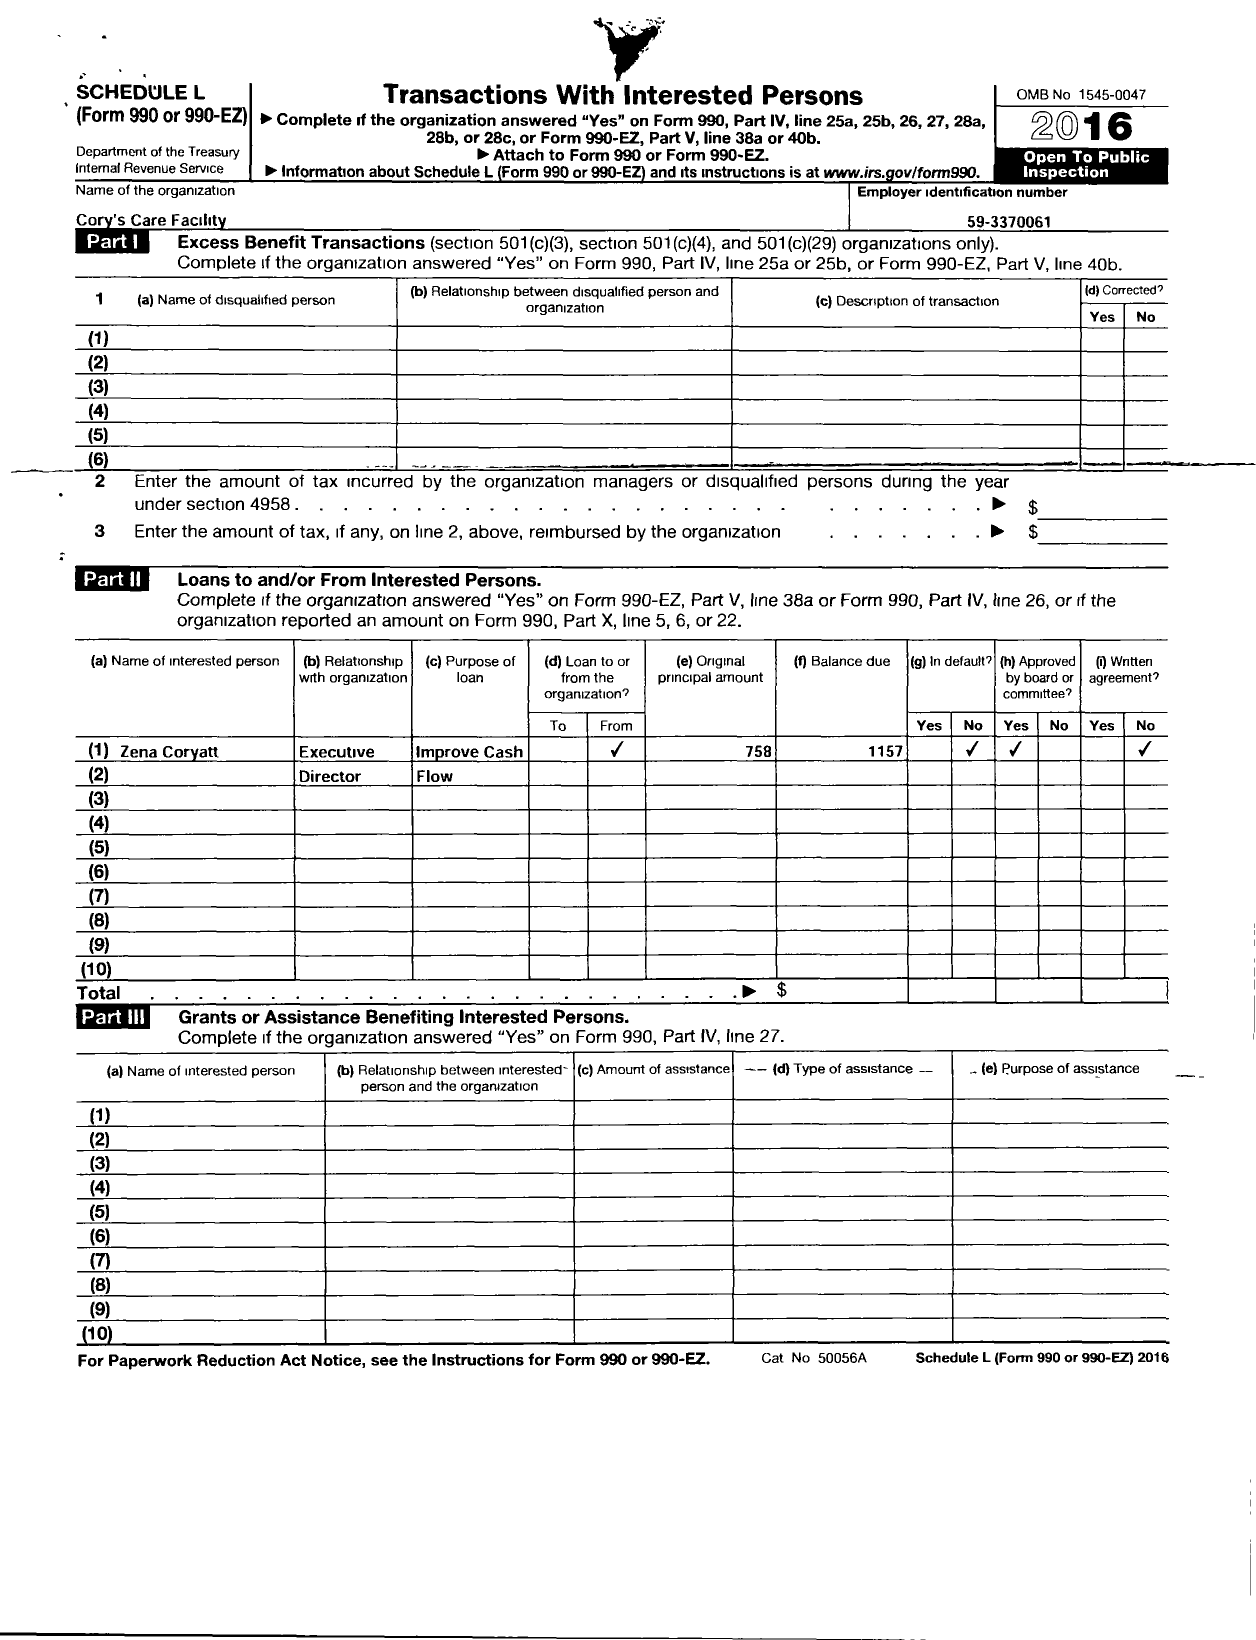 Image of first page of 2016 Form 990ER for Corys Care Facility